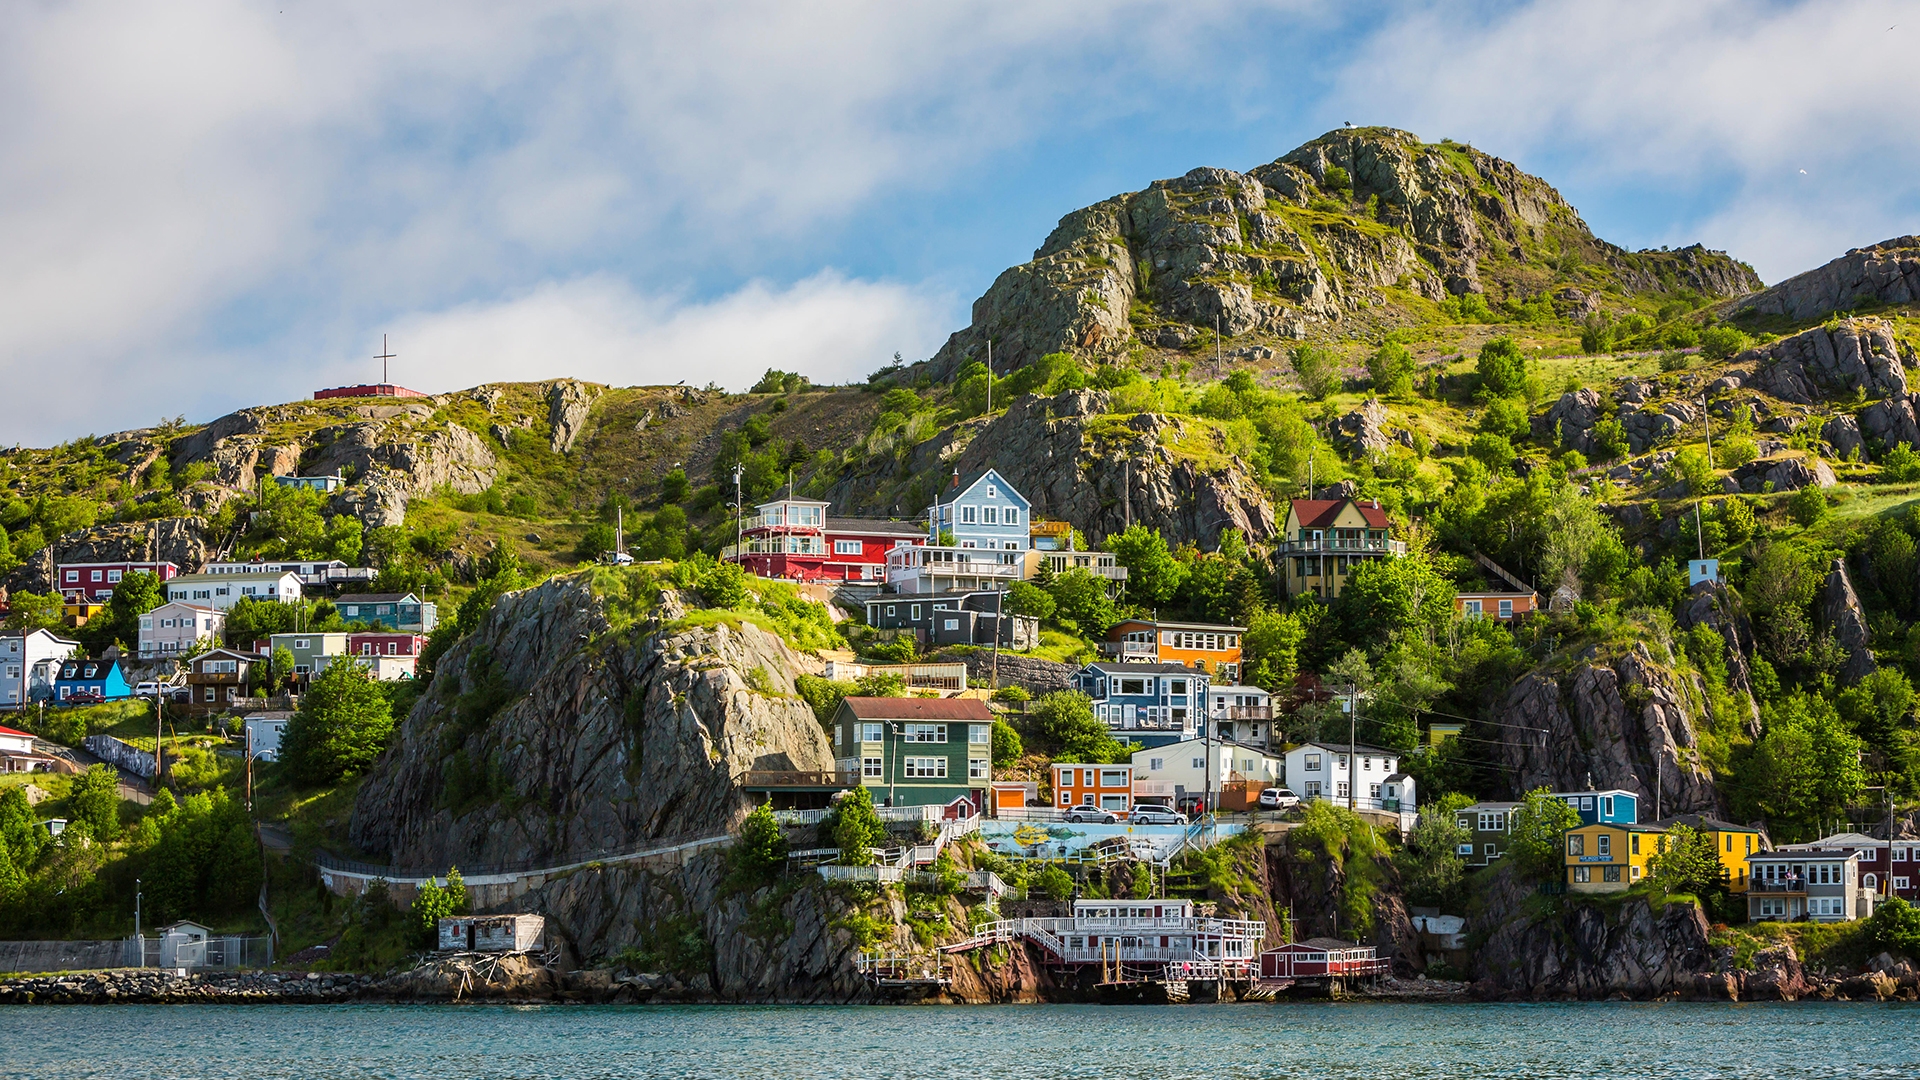 Slopes of Signal Hill in St. John's, Newfoundland and Labrador by Terrance Klassen